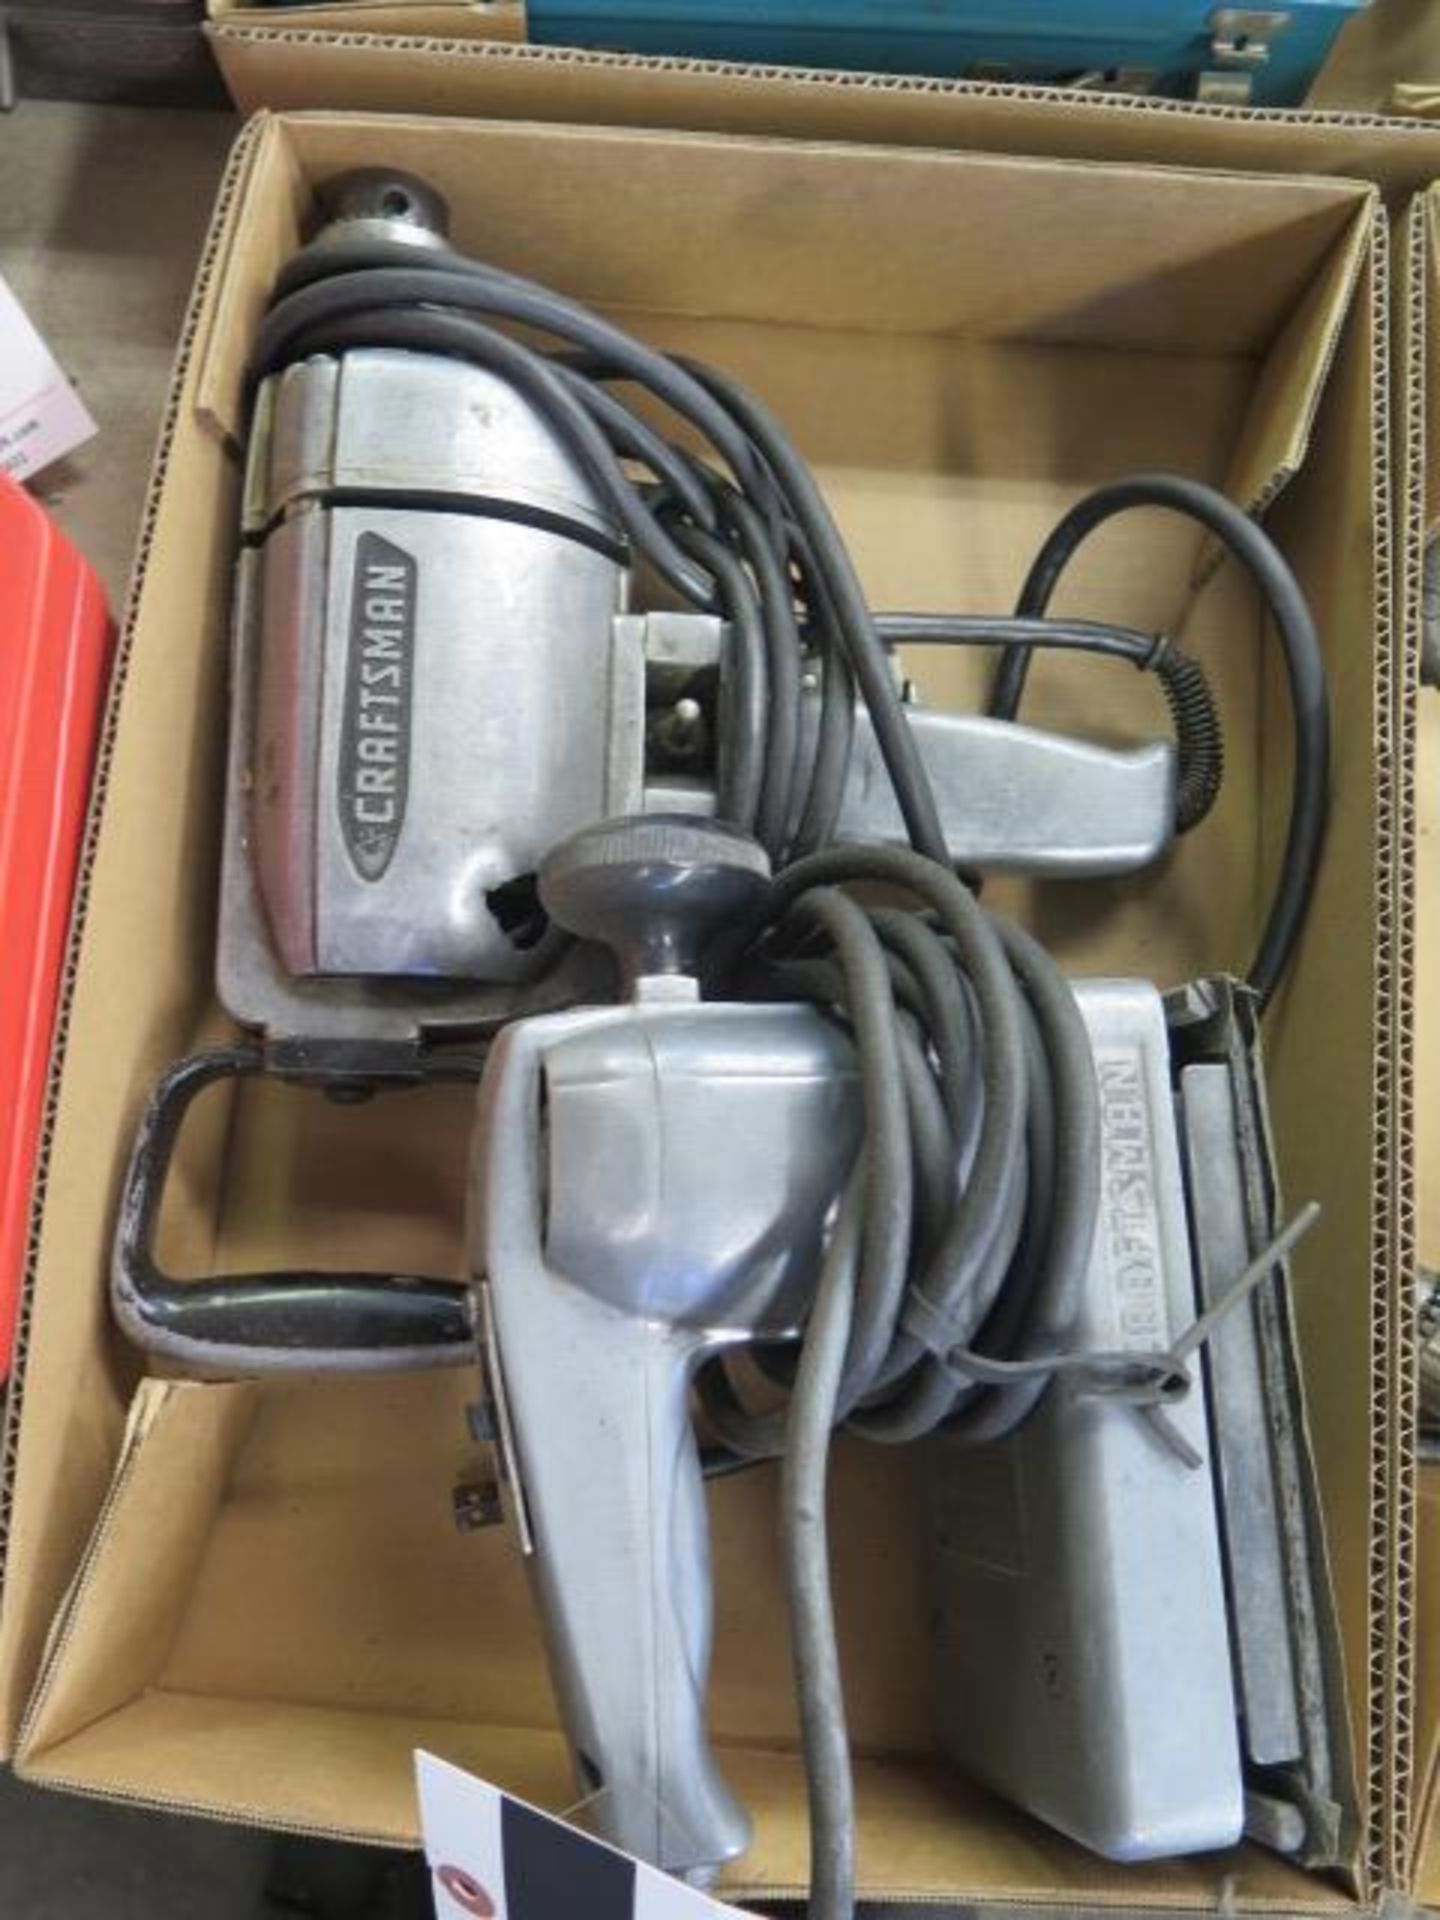 Craftsman Electric Drill and Pad Sander - Image 2 of 2